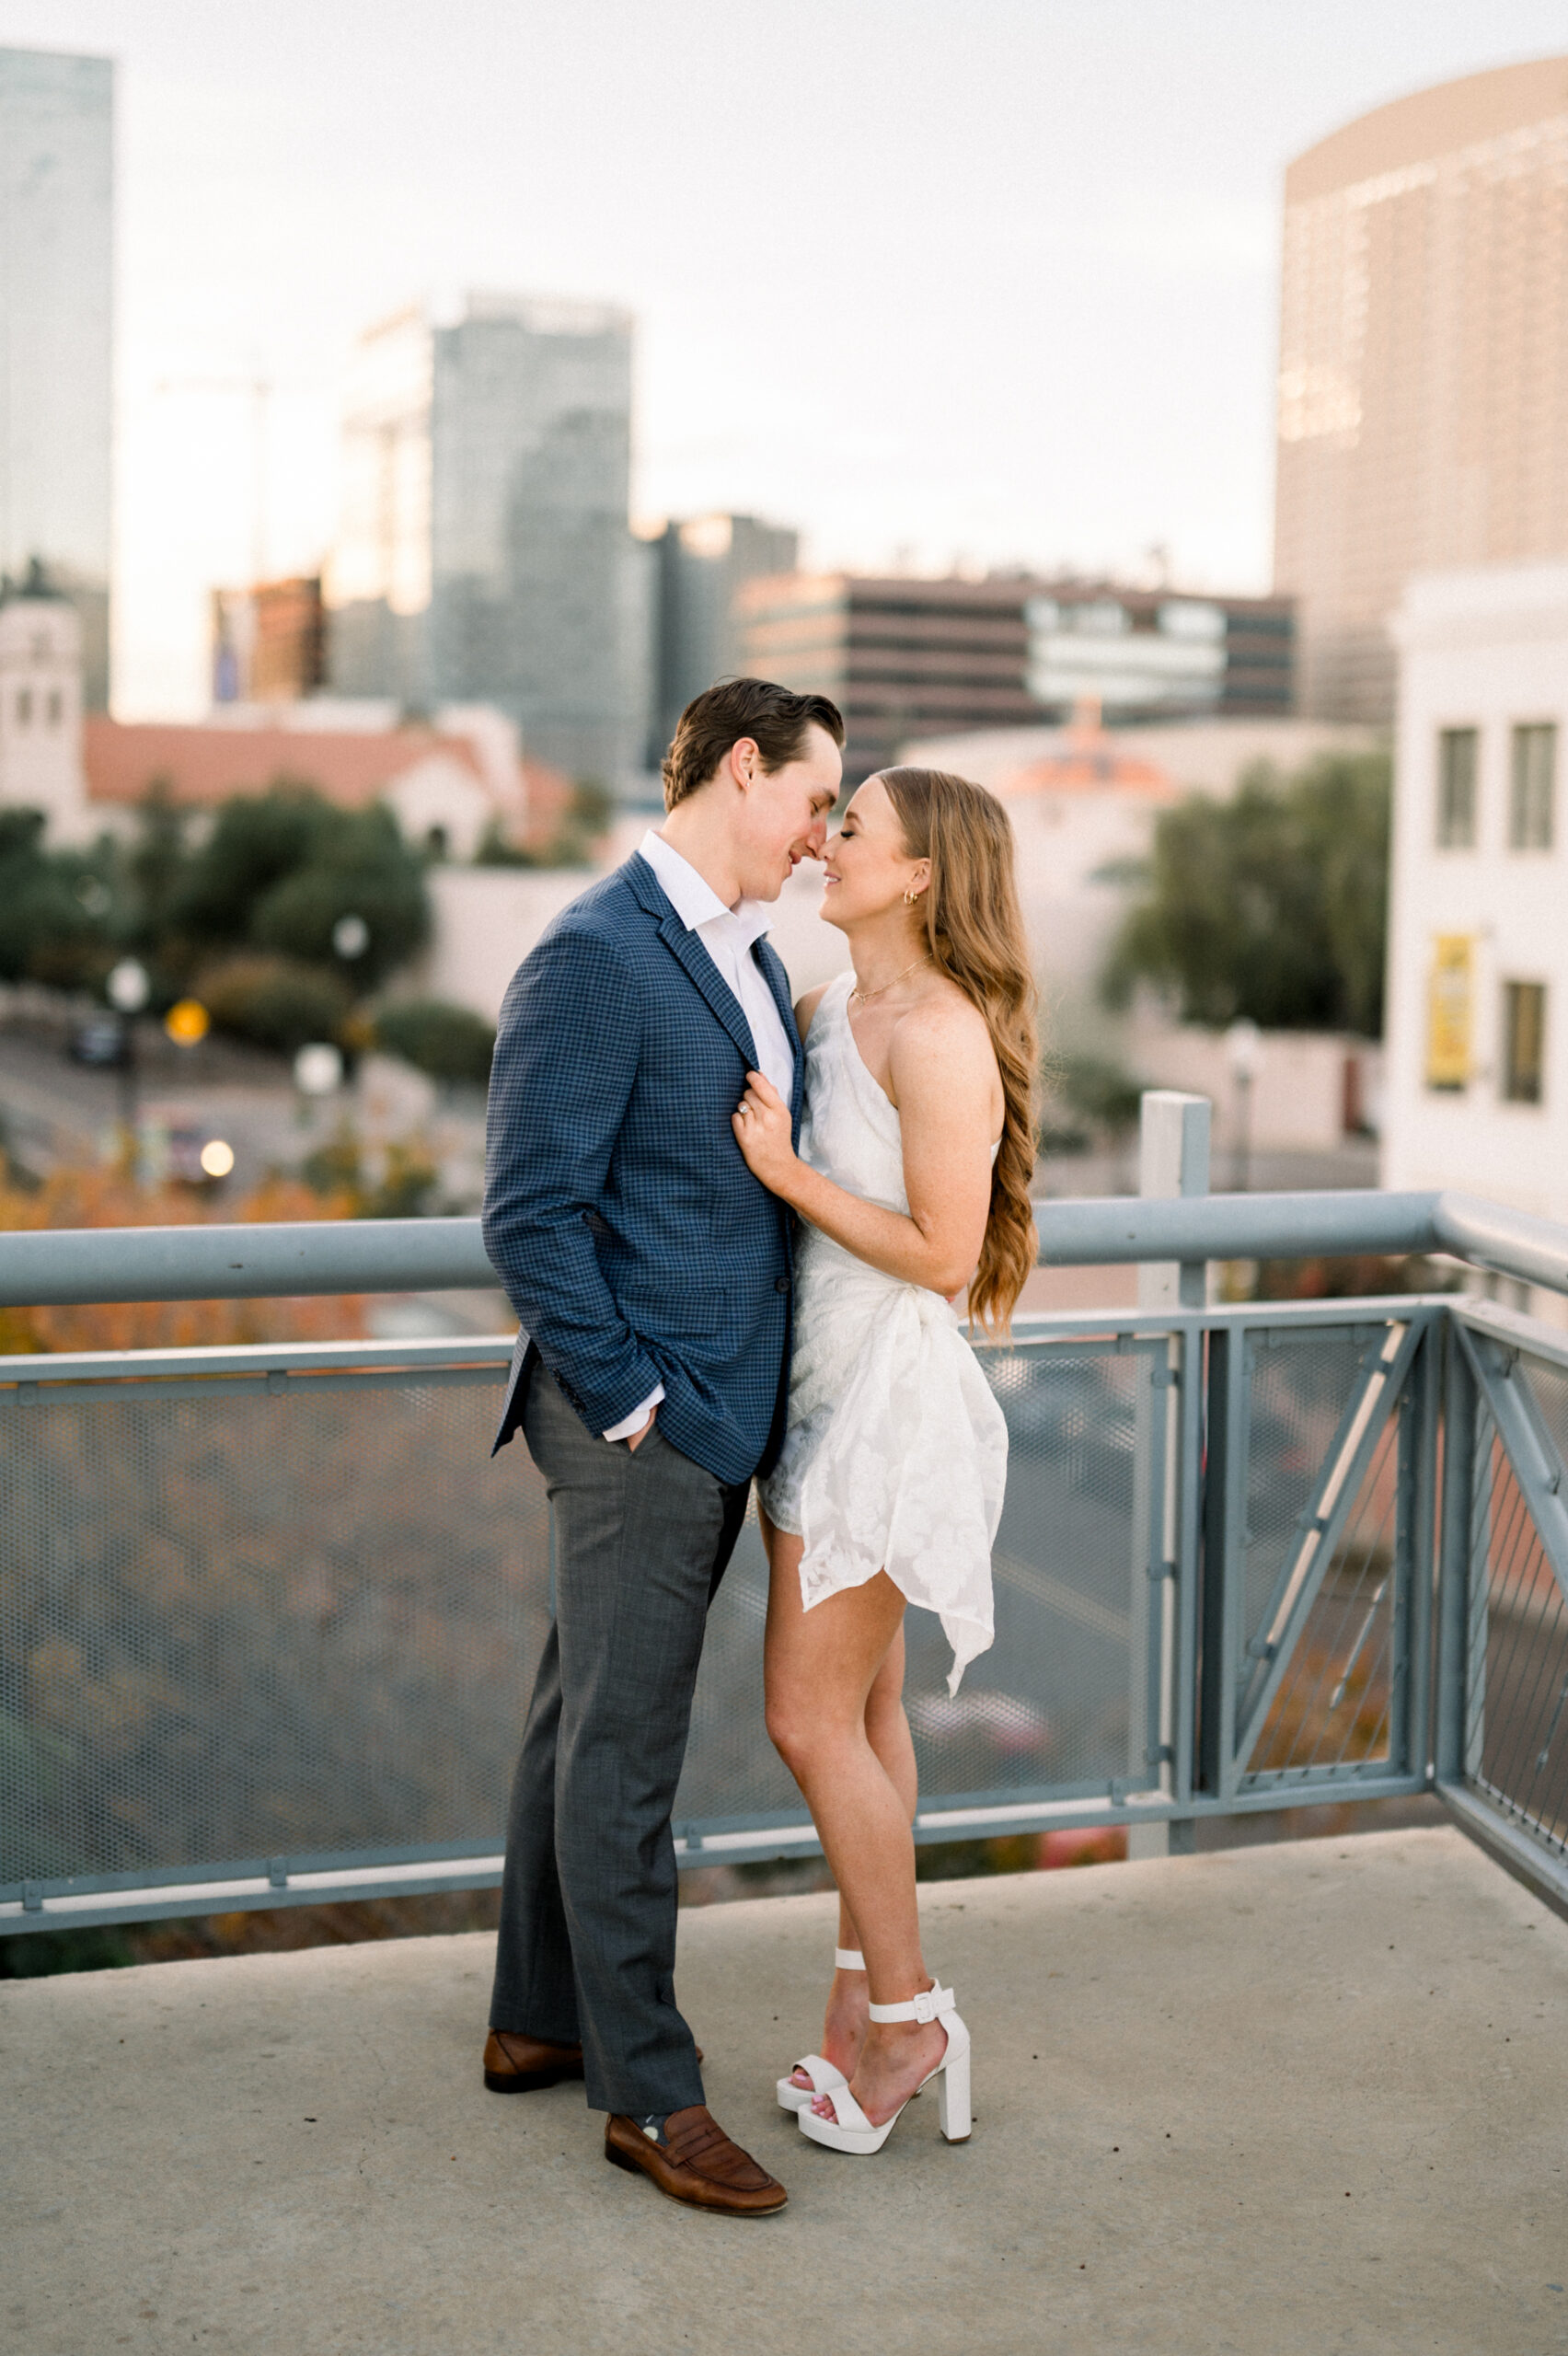 Natalie + Matts Downtown Phoenix engagement session was an absolute stunner. I can't wait to get them married at The Secret Garden this fall!